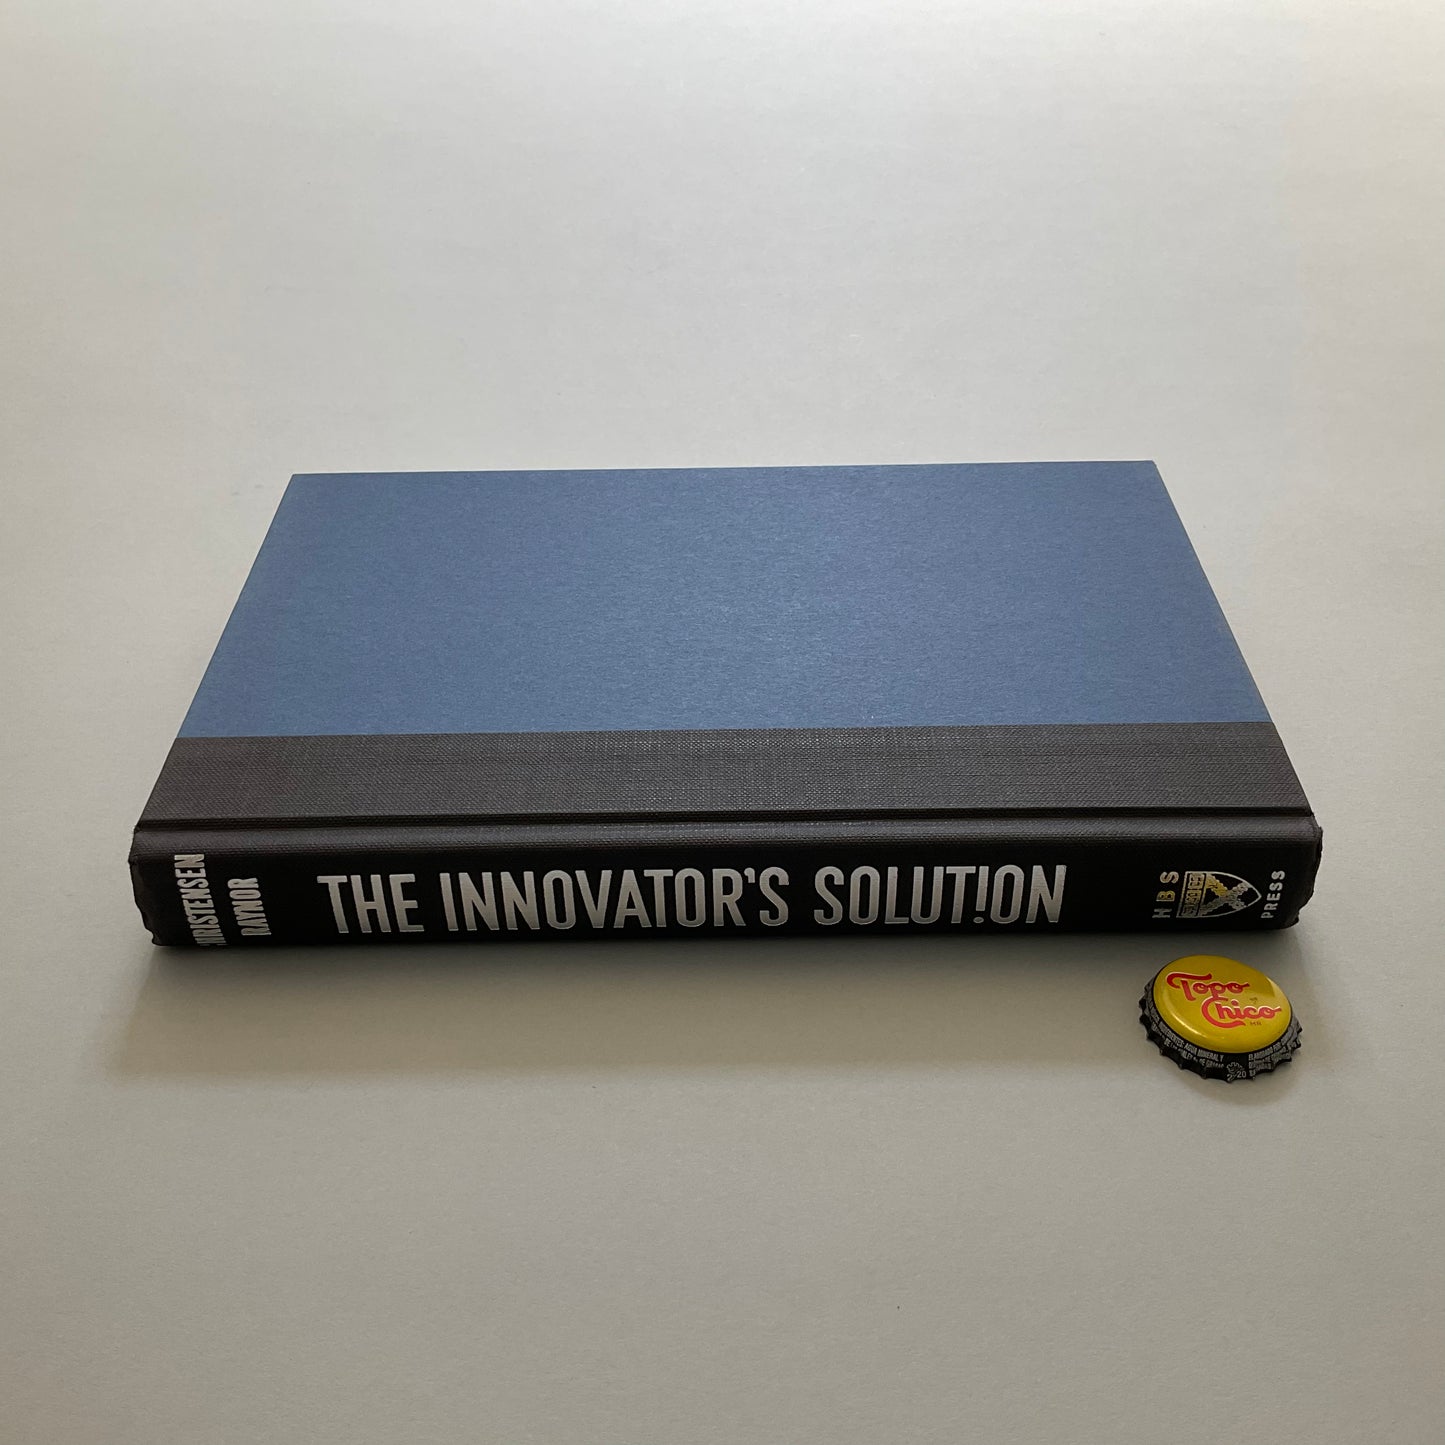 The Innovator’s Solution Book